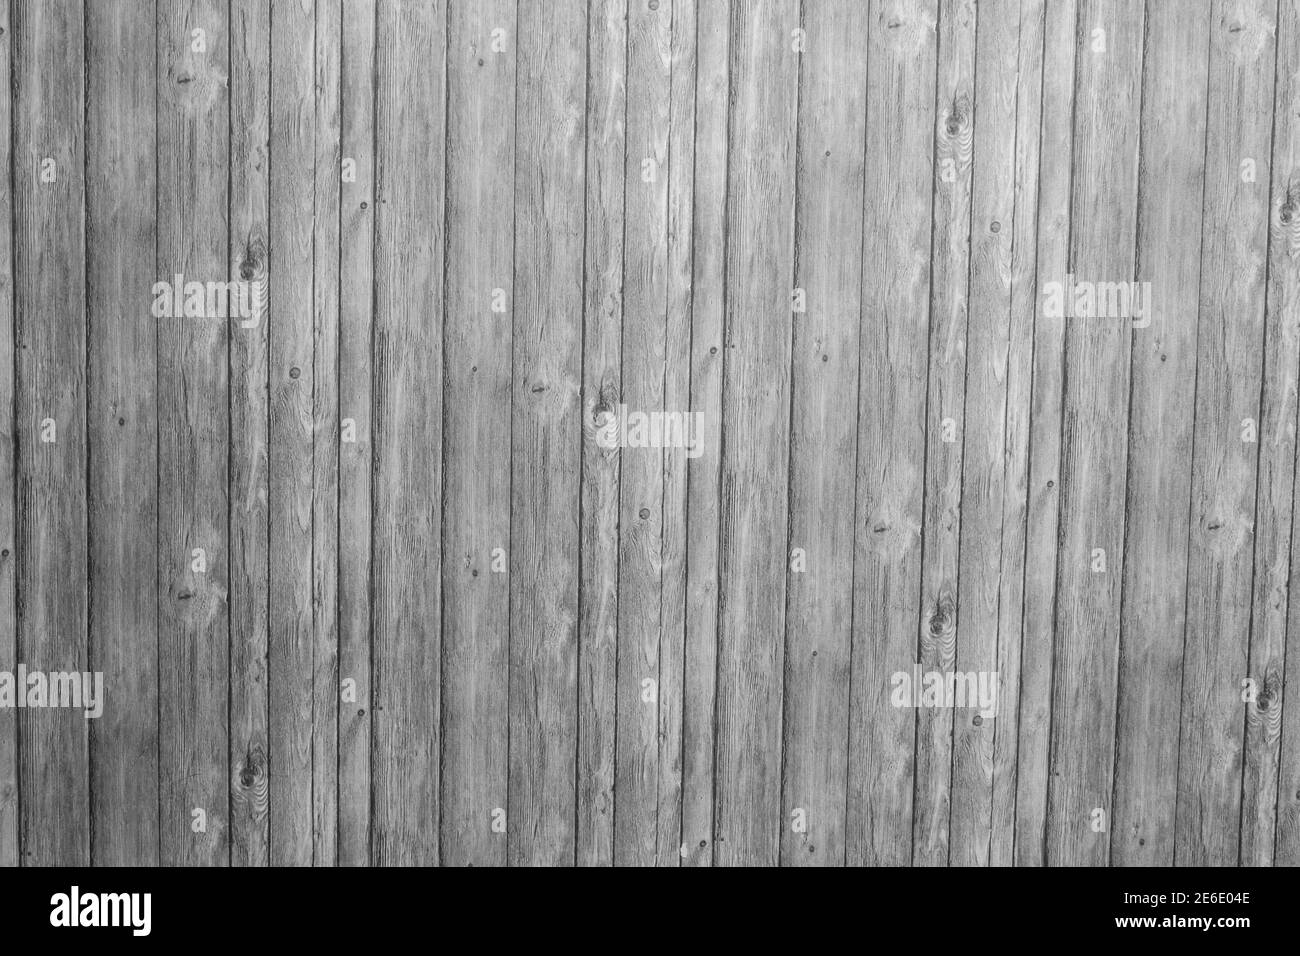 old wooden boards background Stock Photo